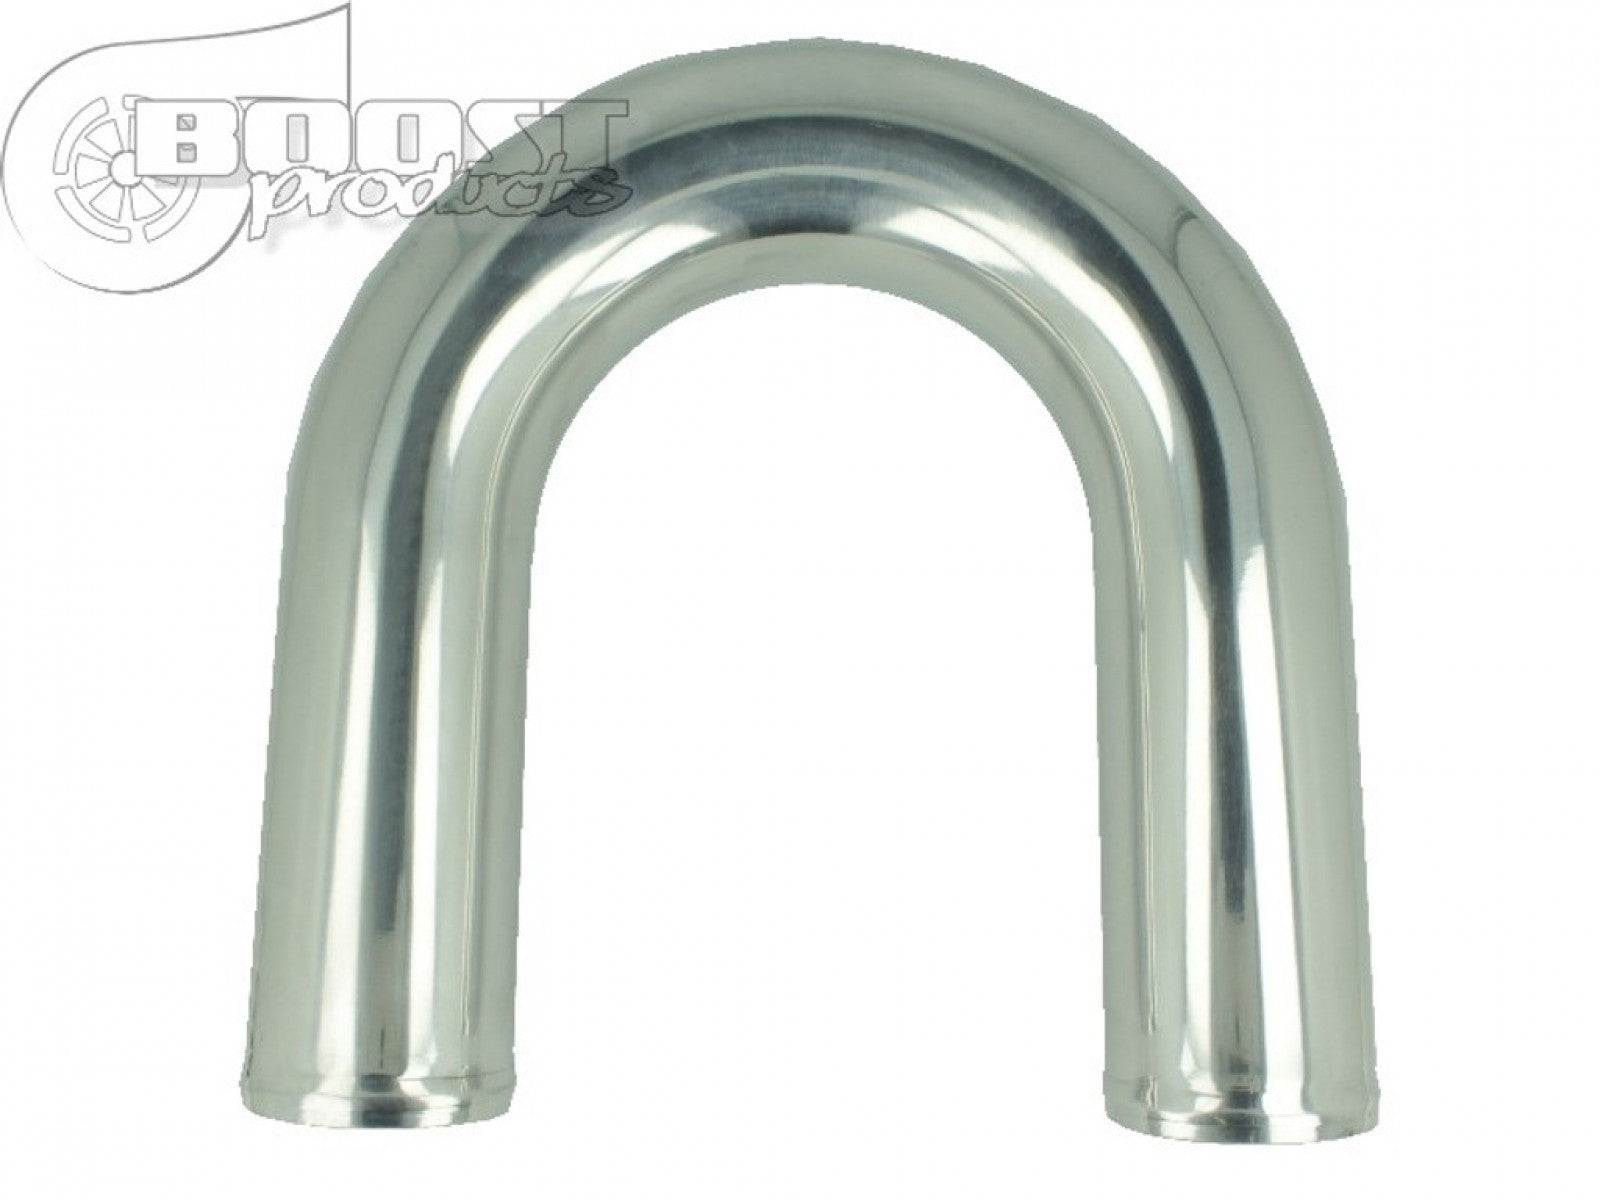 BOOST Products Aluminum Elbow 180 Degrees with 38mm (1-1/2") OD, Mandrel Bent, Polished